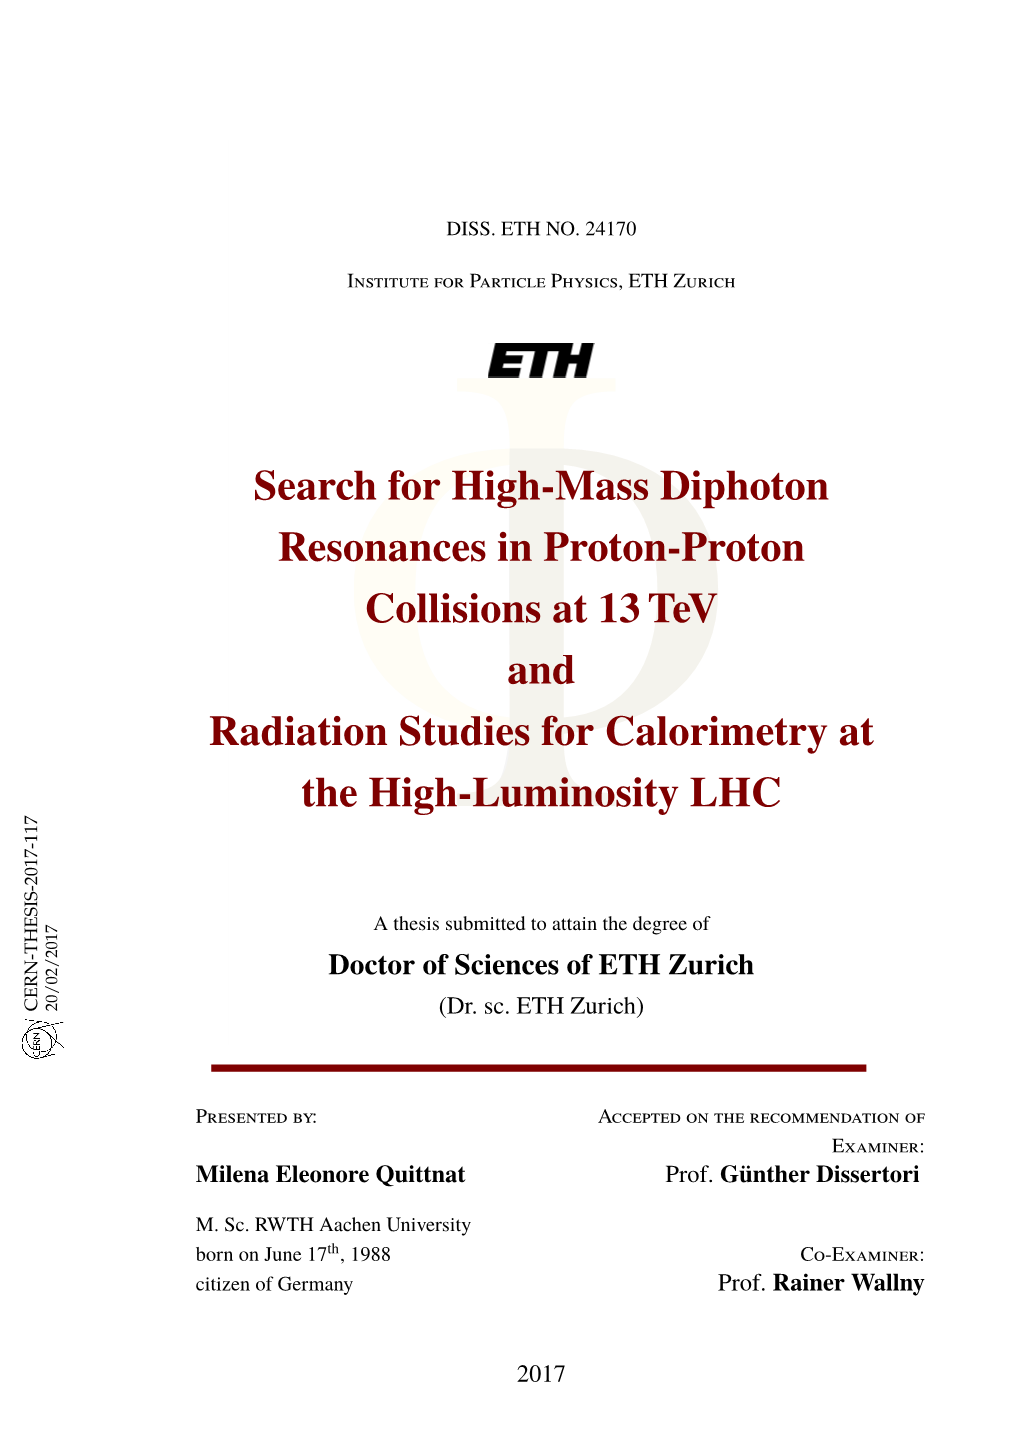 Search for High-Mass Diphoton Resonances in Proton-Proton Collisions at 13 Tev and Combination with 8 Tev Search”, (2016)